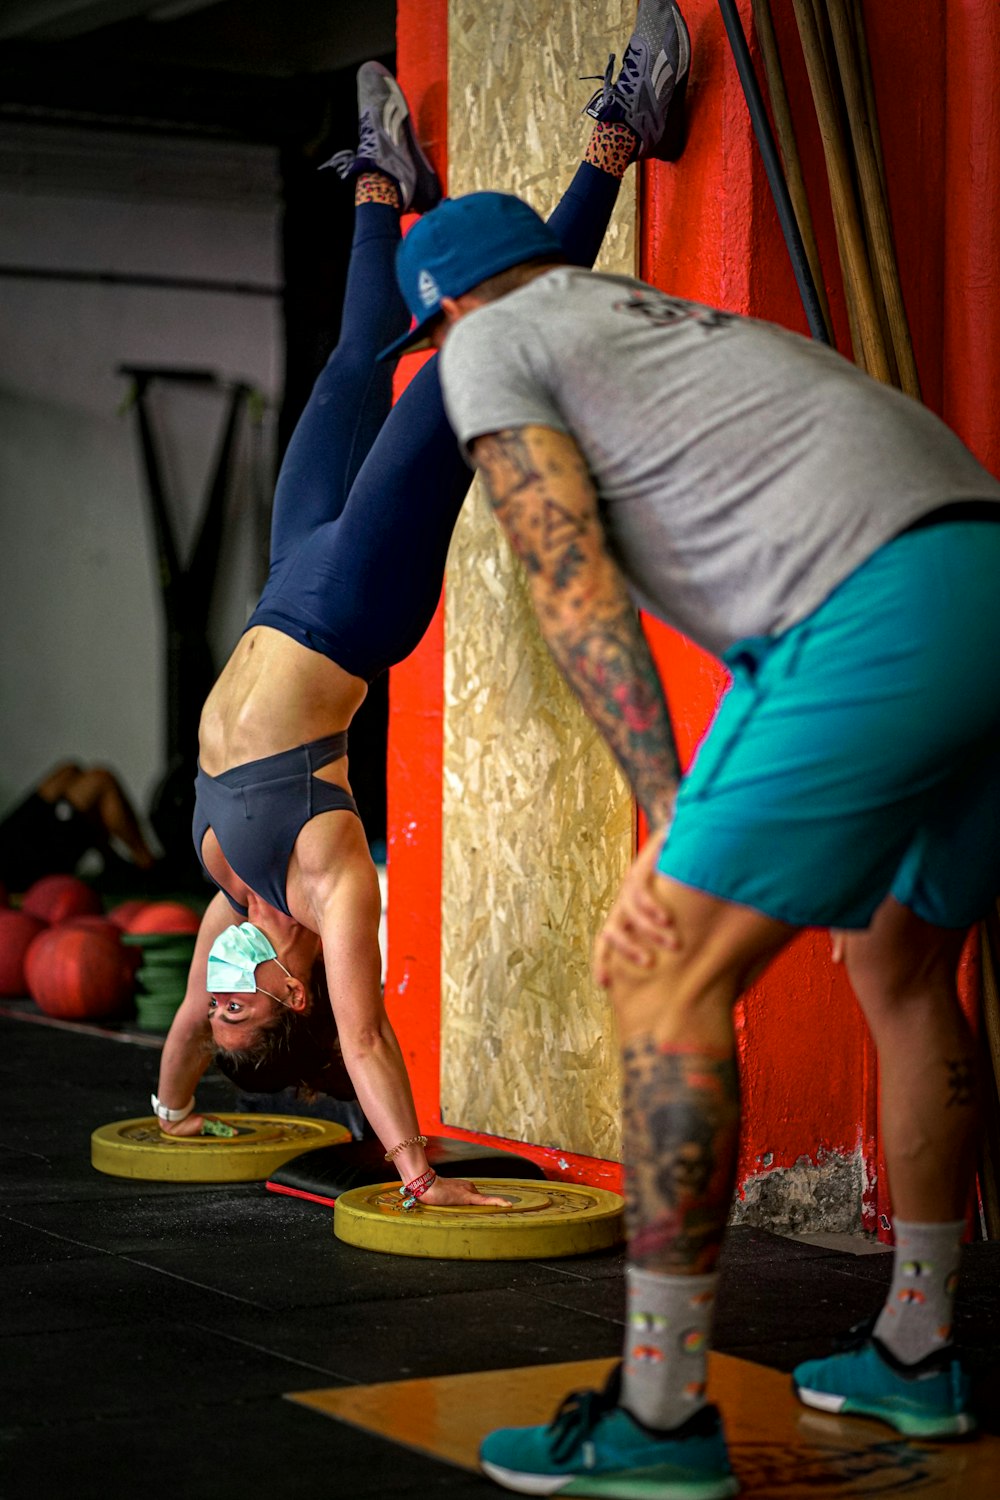 man in gray shirt and blue shorts doing yoga